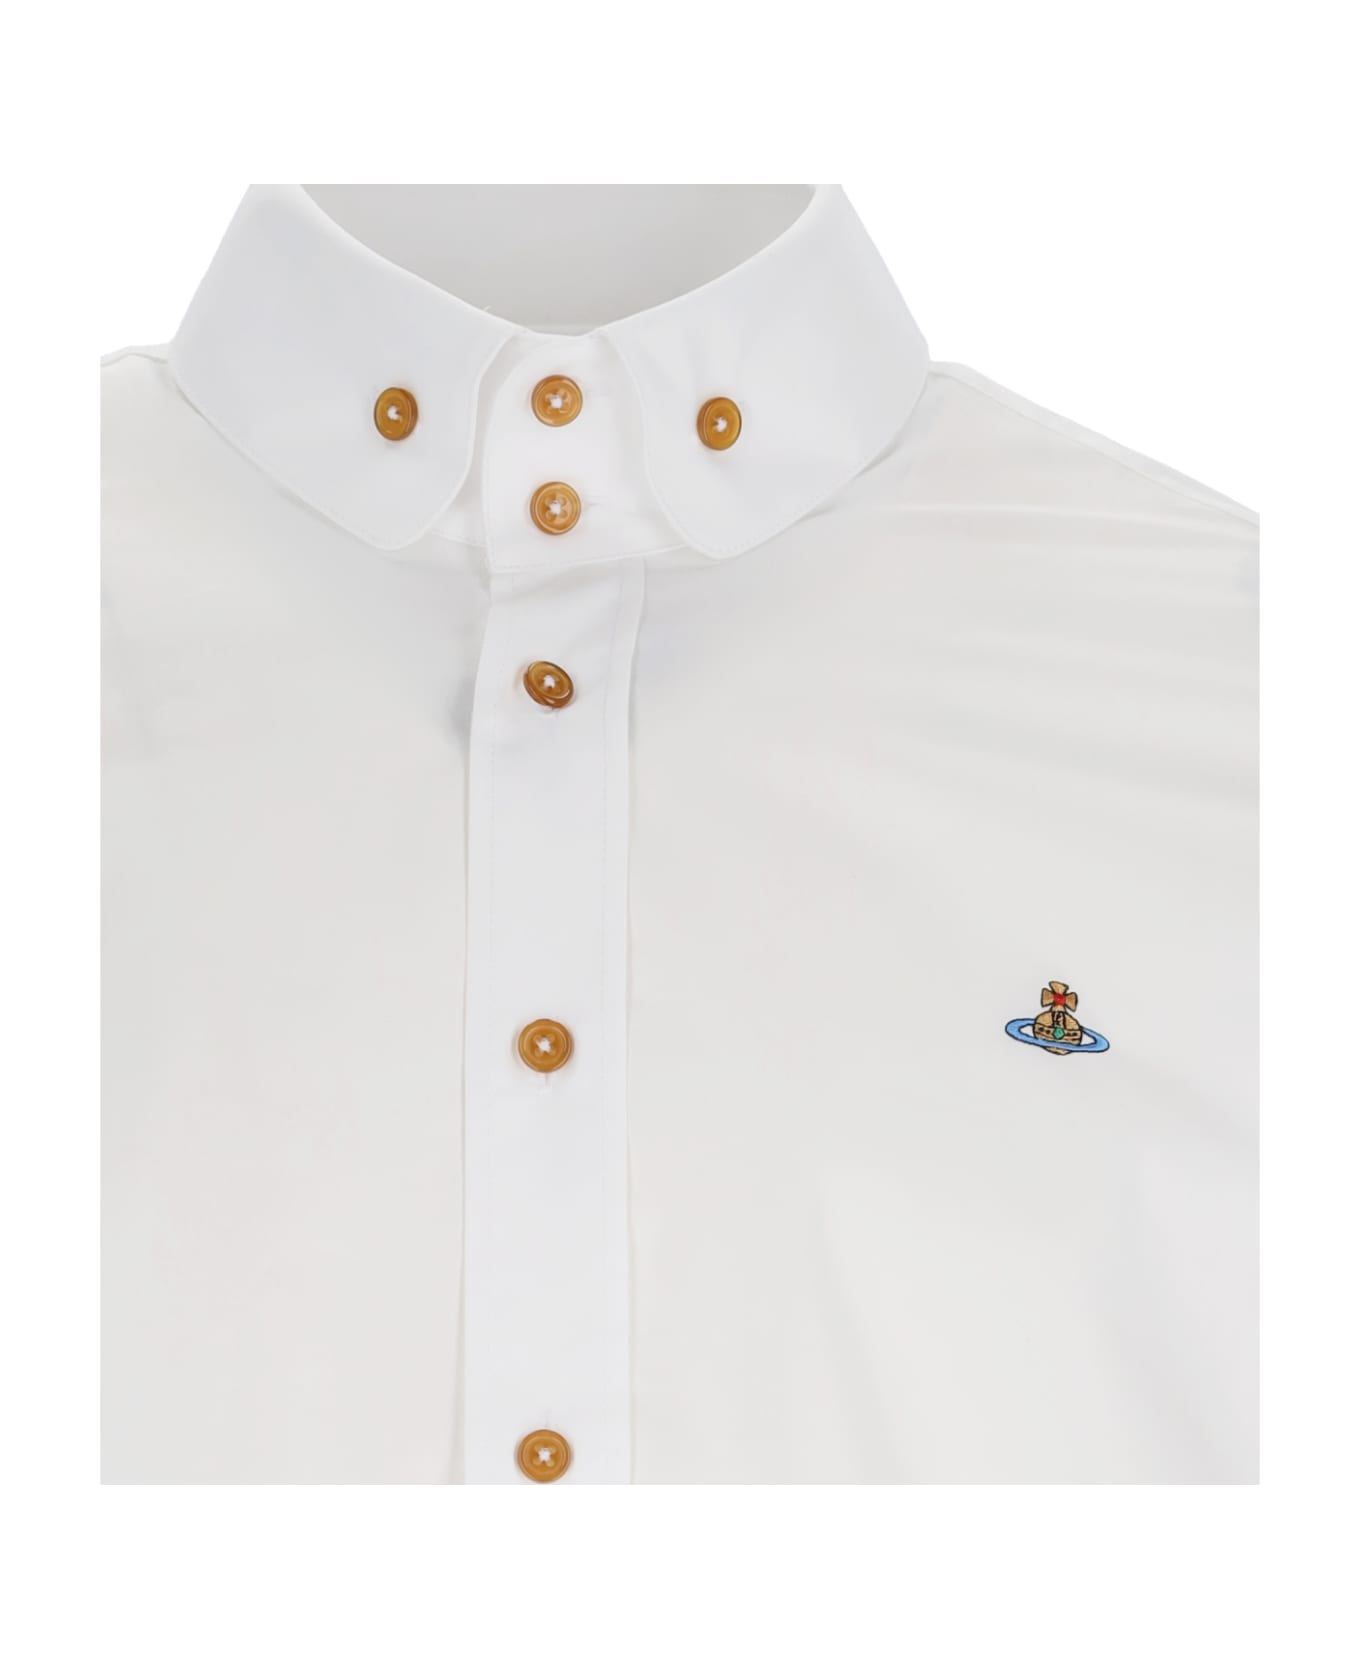 Vivienne Westwood 'two Button Krall' Shirt - White